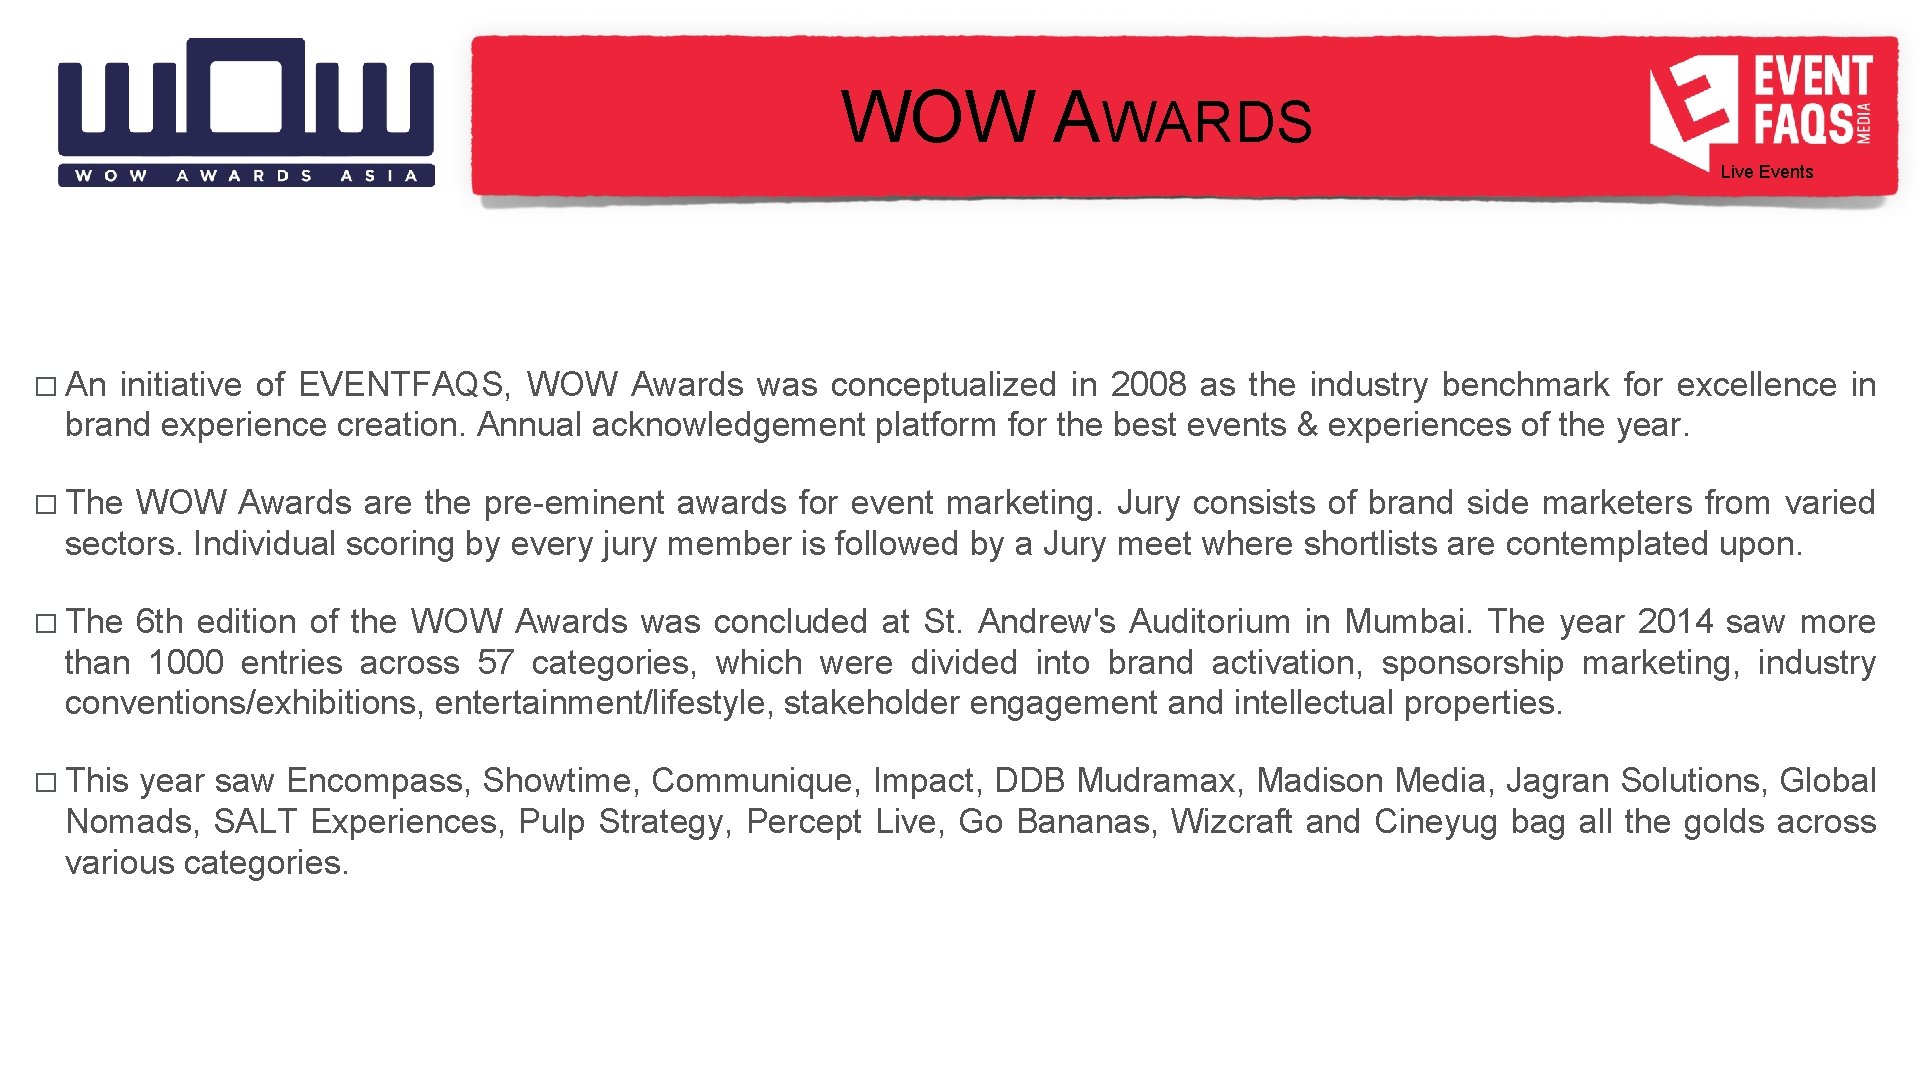 WOW AWARDS Live Events � An initiative of EVENTFAQS, WOW Awards was conceptualized in